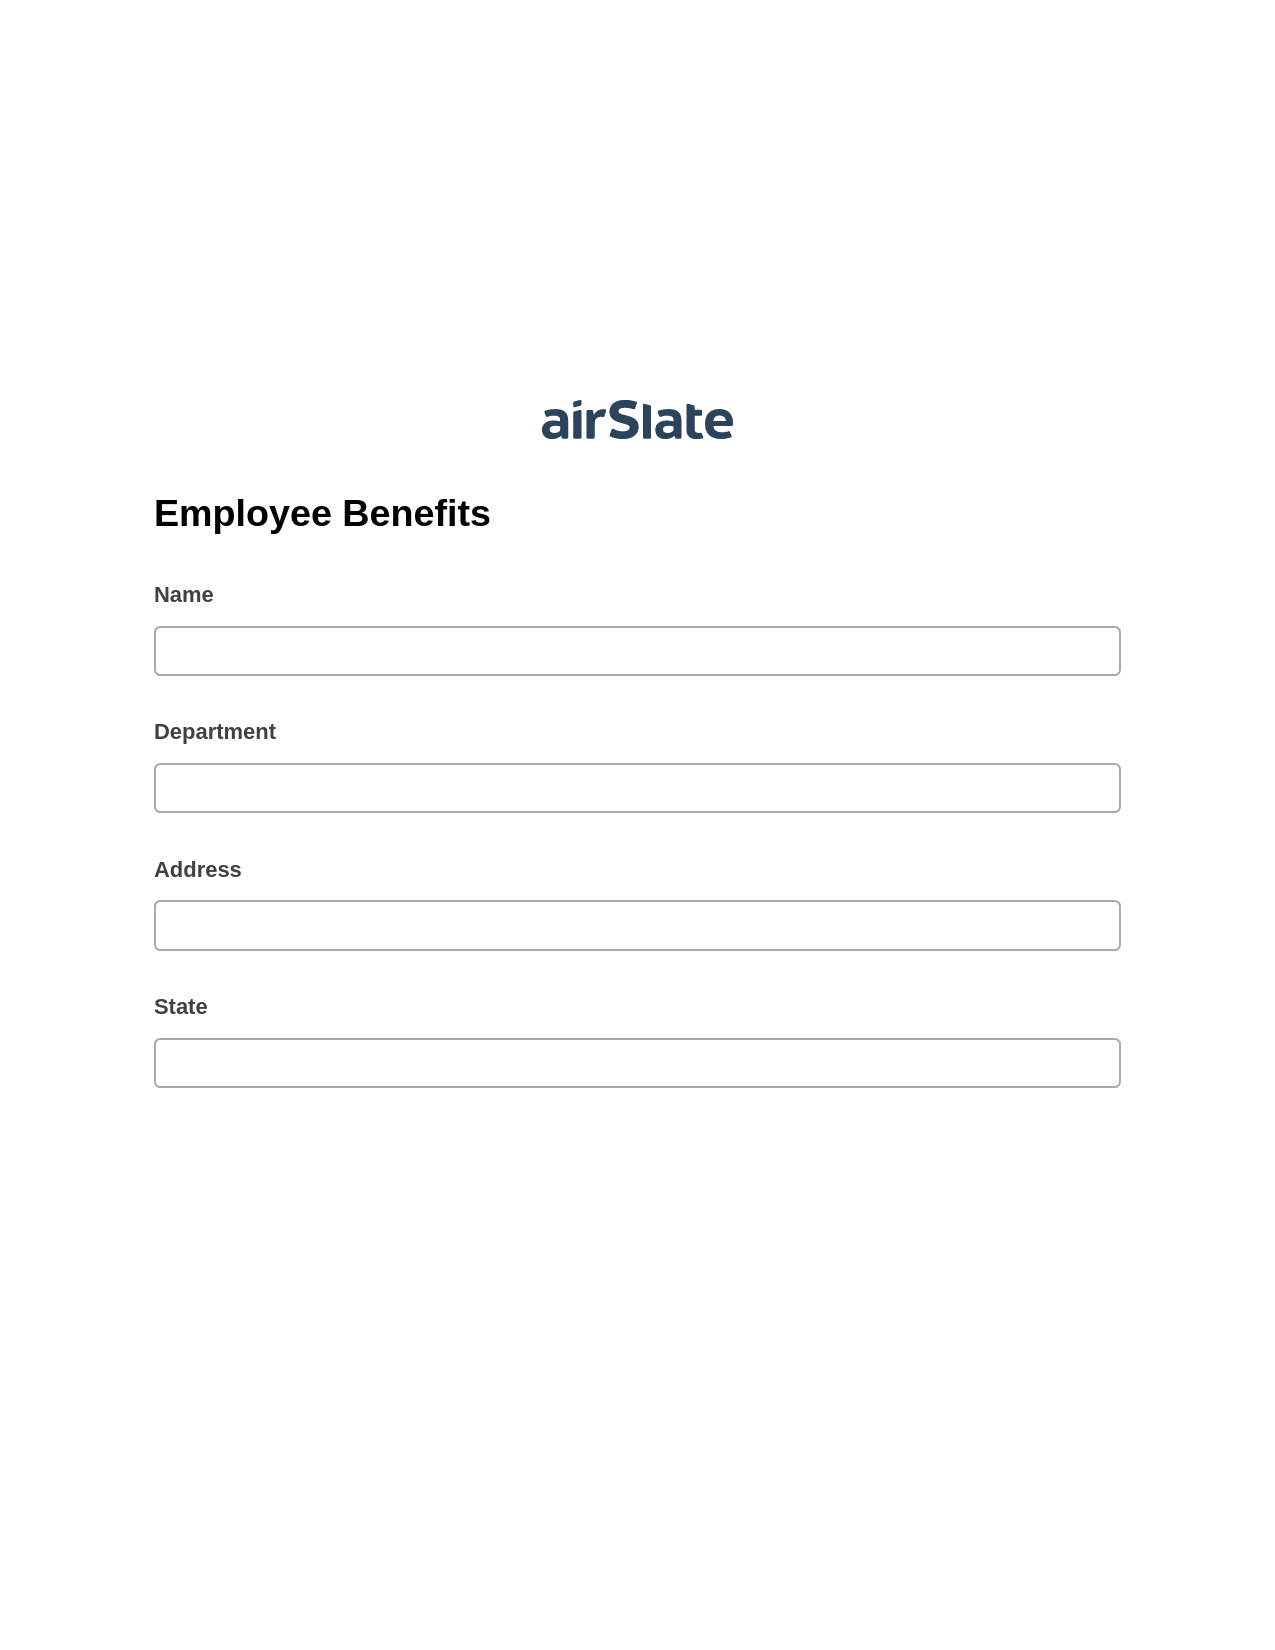 Employee Benefits Pre-fill from Excel Spreadsheet Bot, Lock the slate bot, Export to MySQL Bot